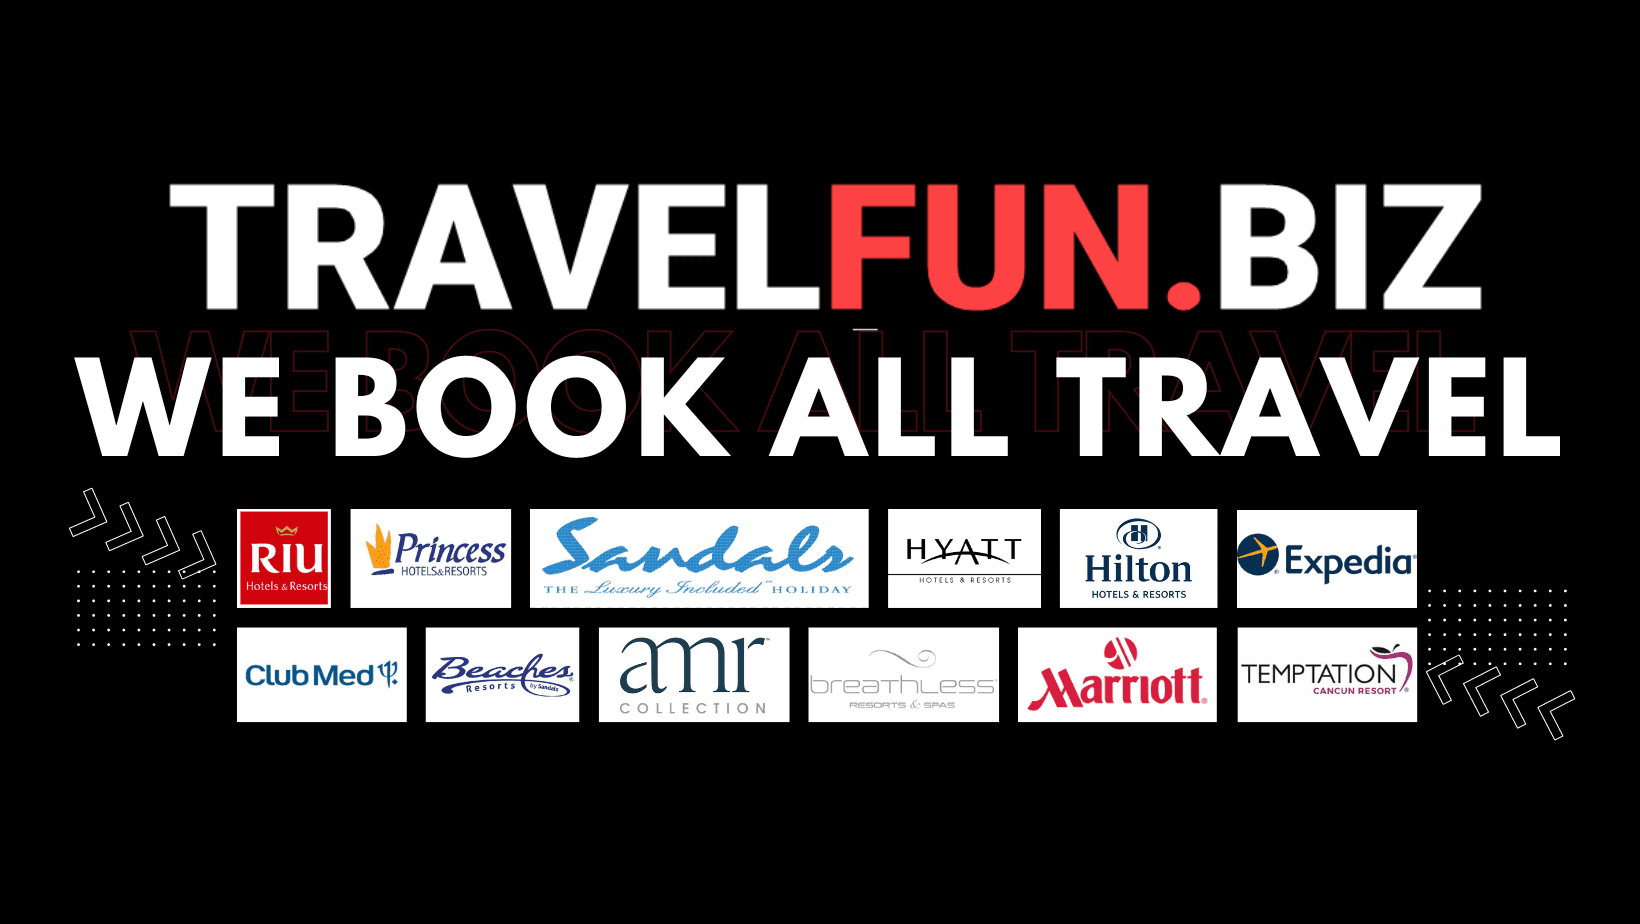 We Book All Travel - Resorts